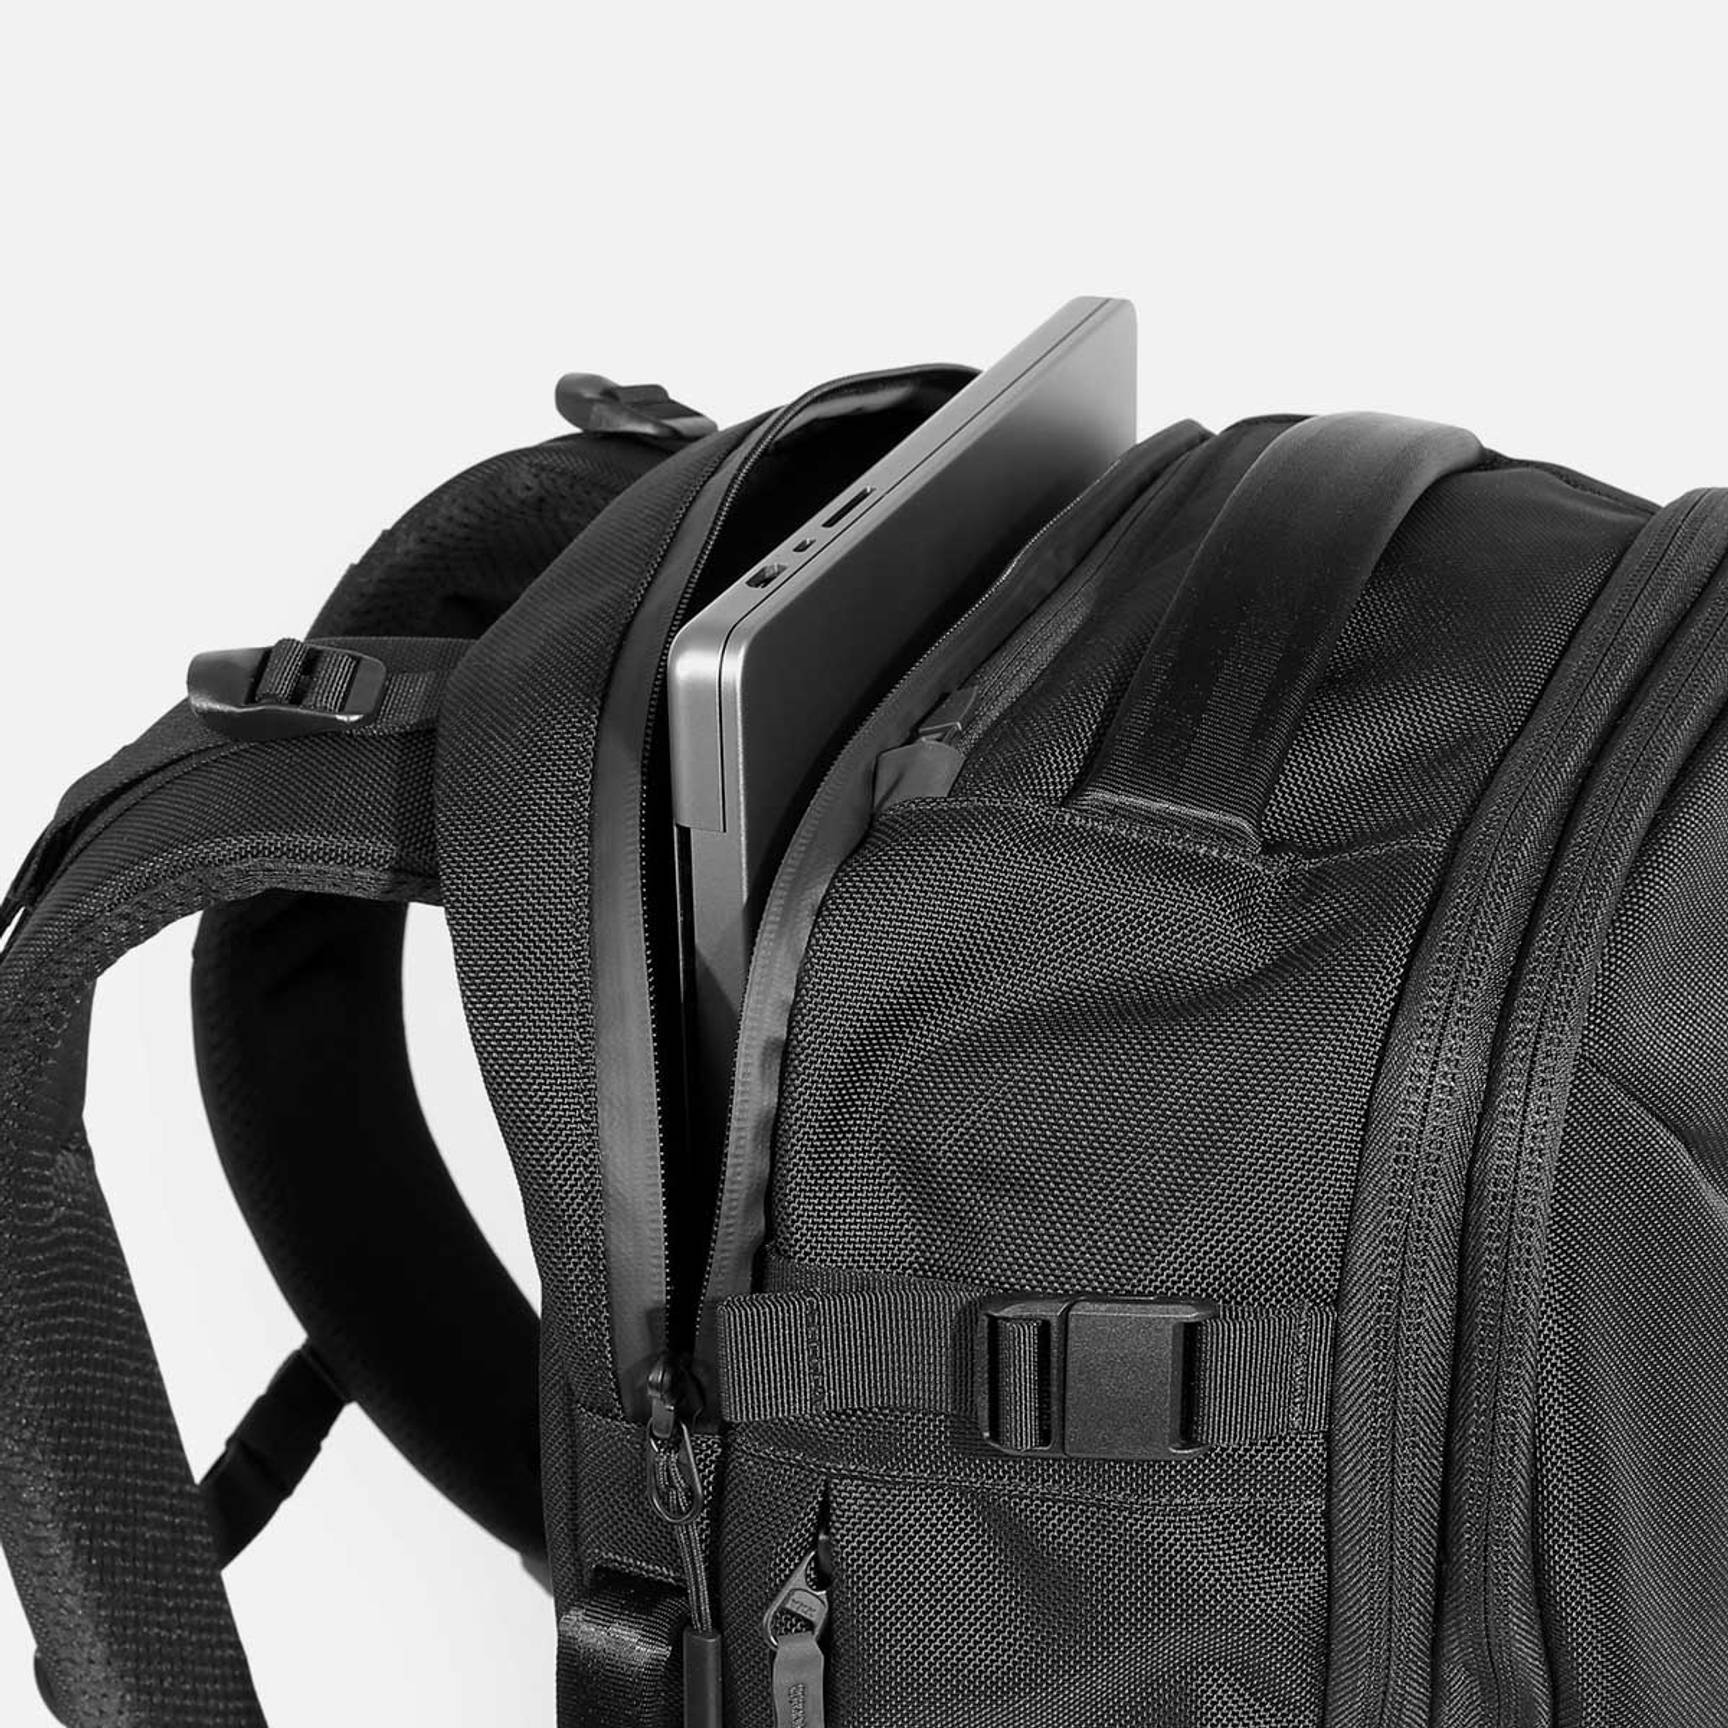 https://cld.accentuate.io/39444979351648/1647455916543/AER21033_travelpack3small_black_laptop.jpg?v=0&options=w_1728